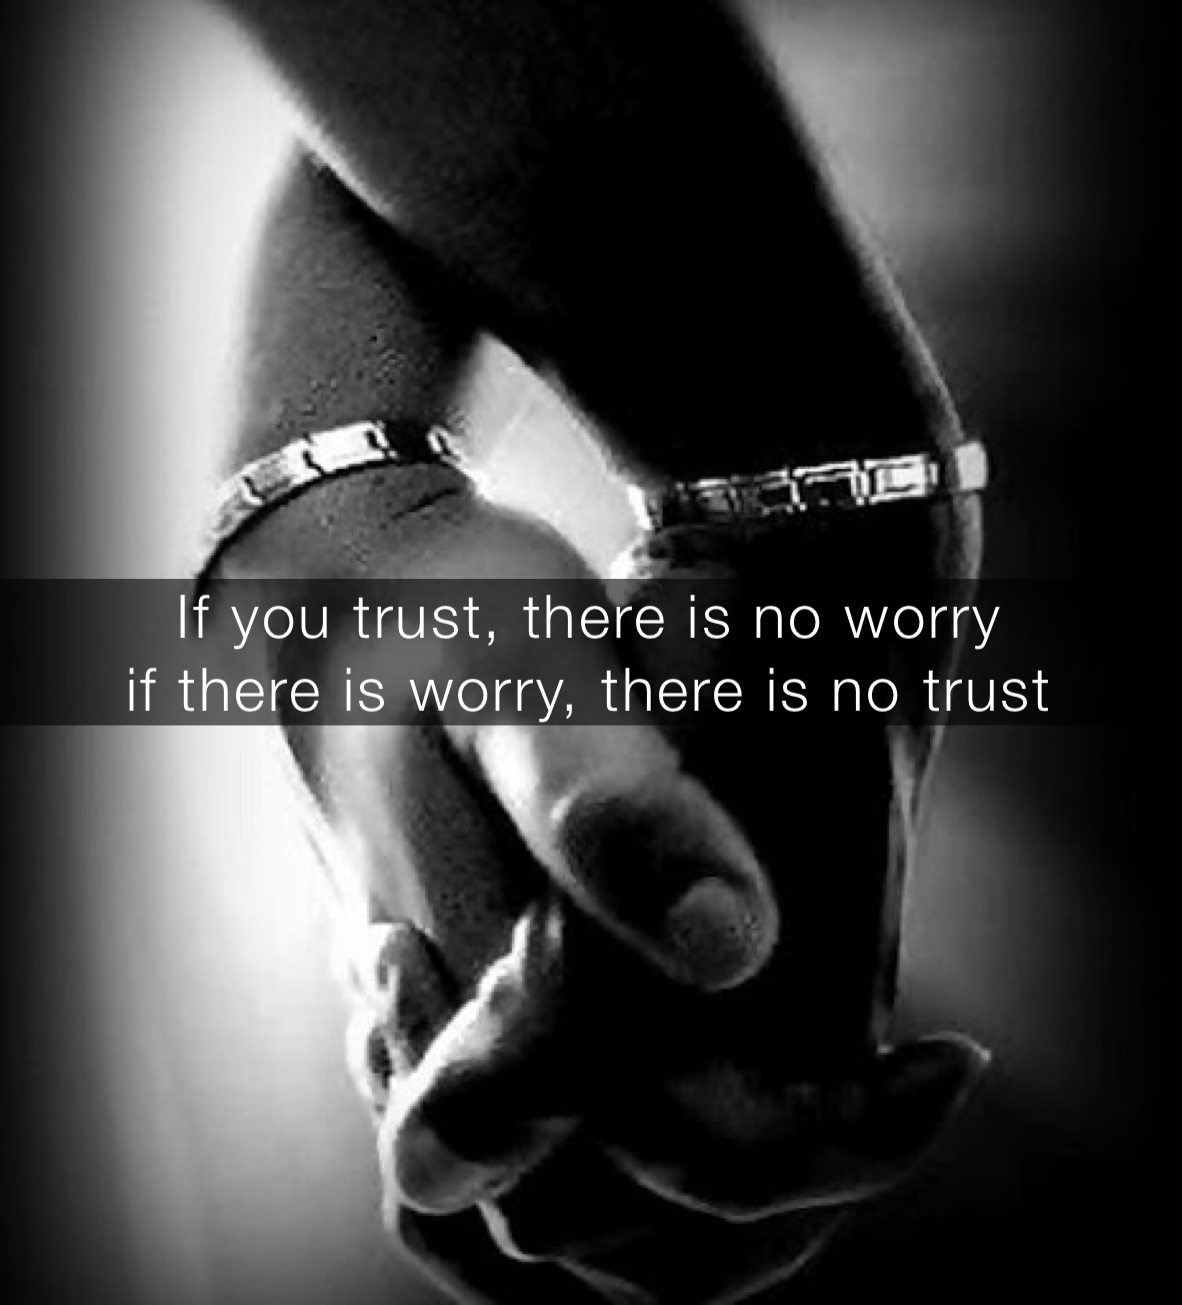 If you trust, there is no worry
if there is worry, there is no trust